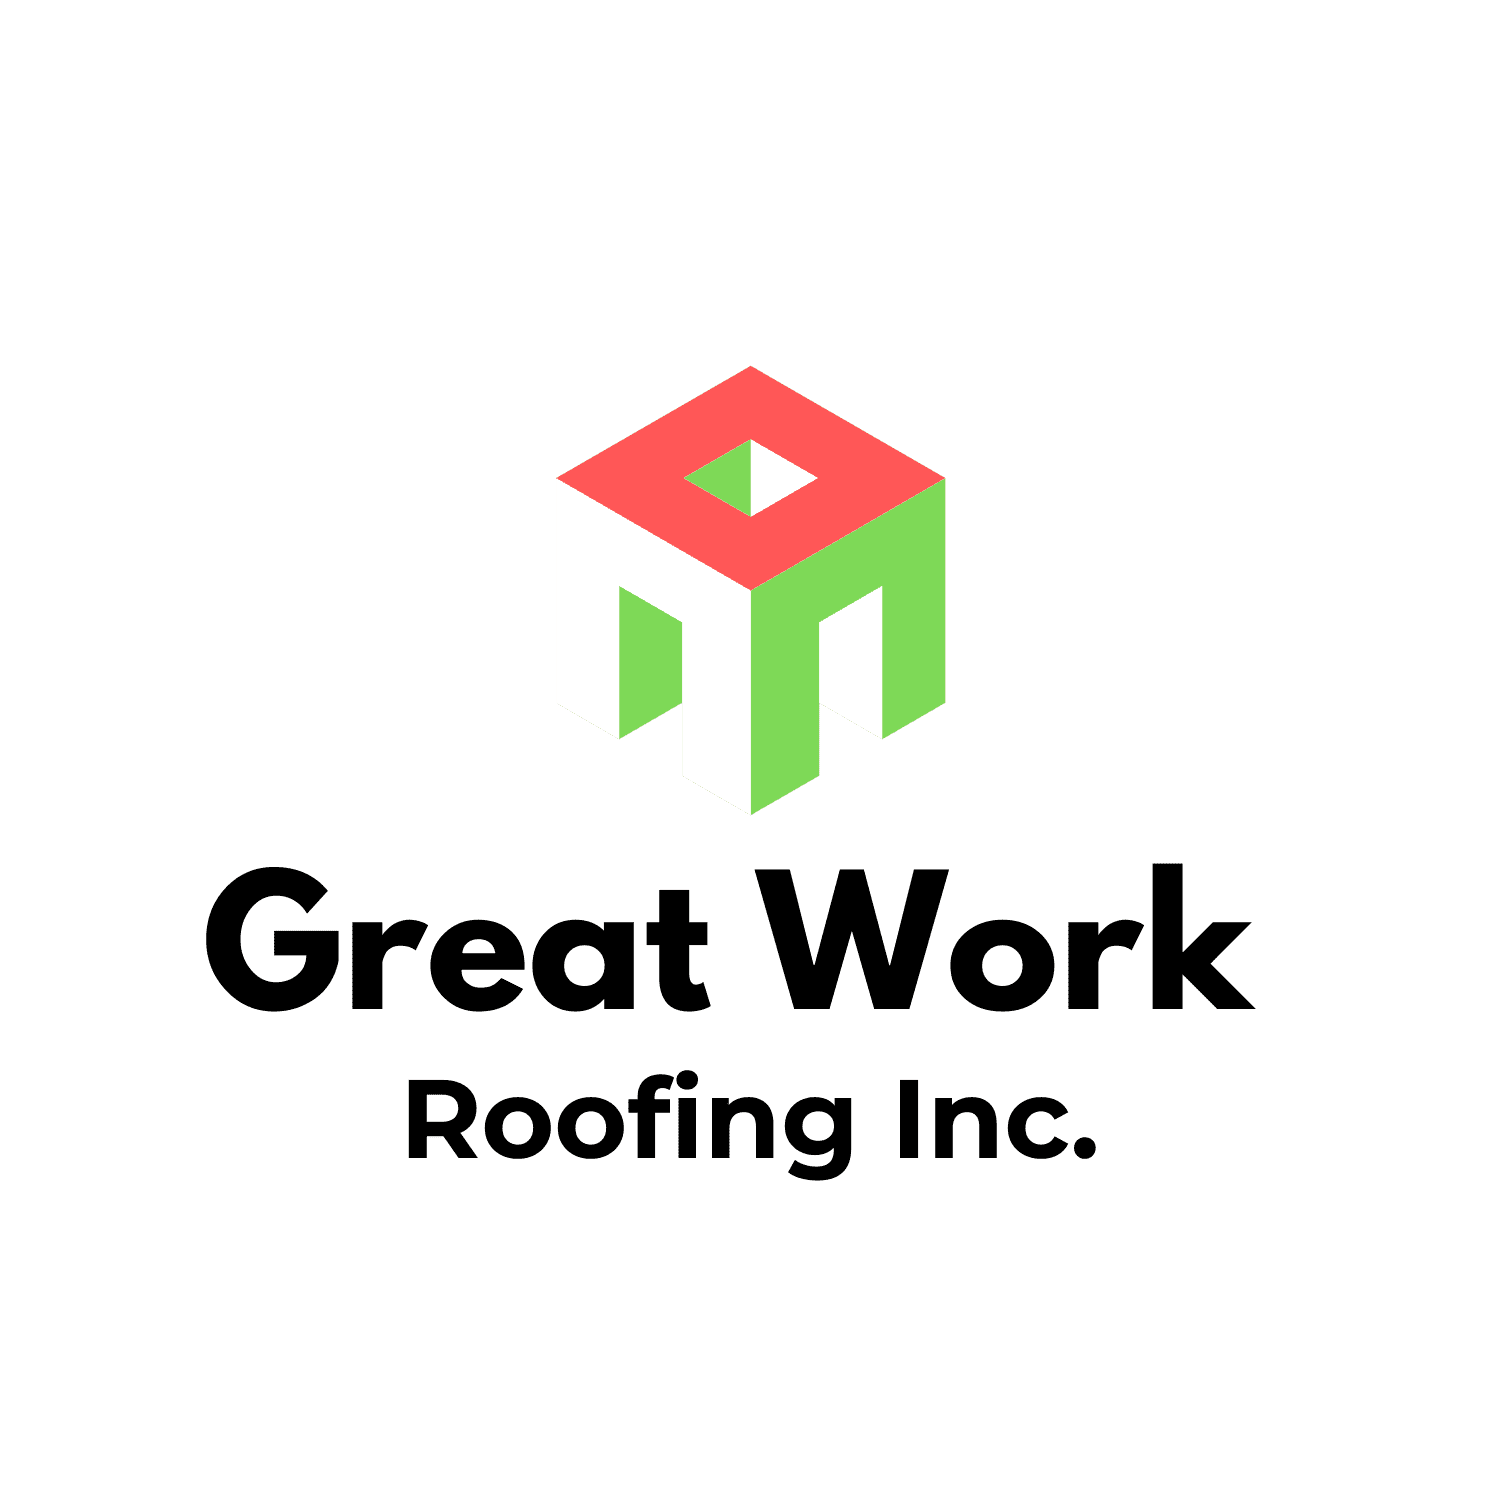 Great Work Roofing